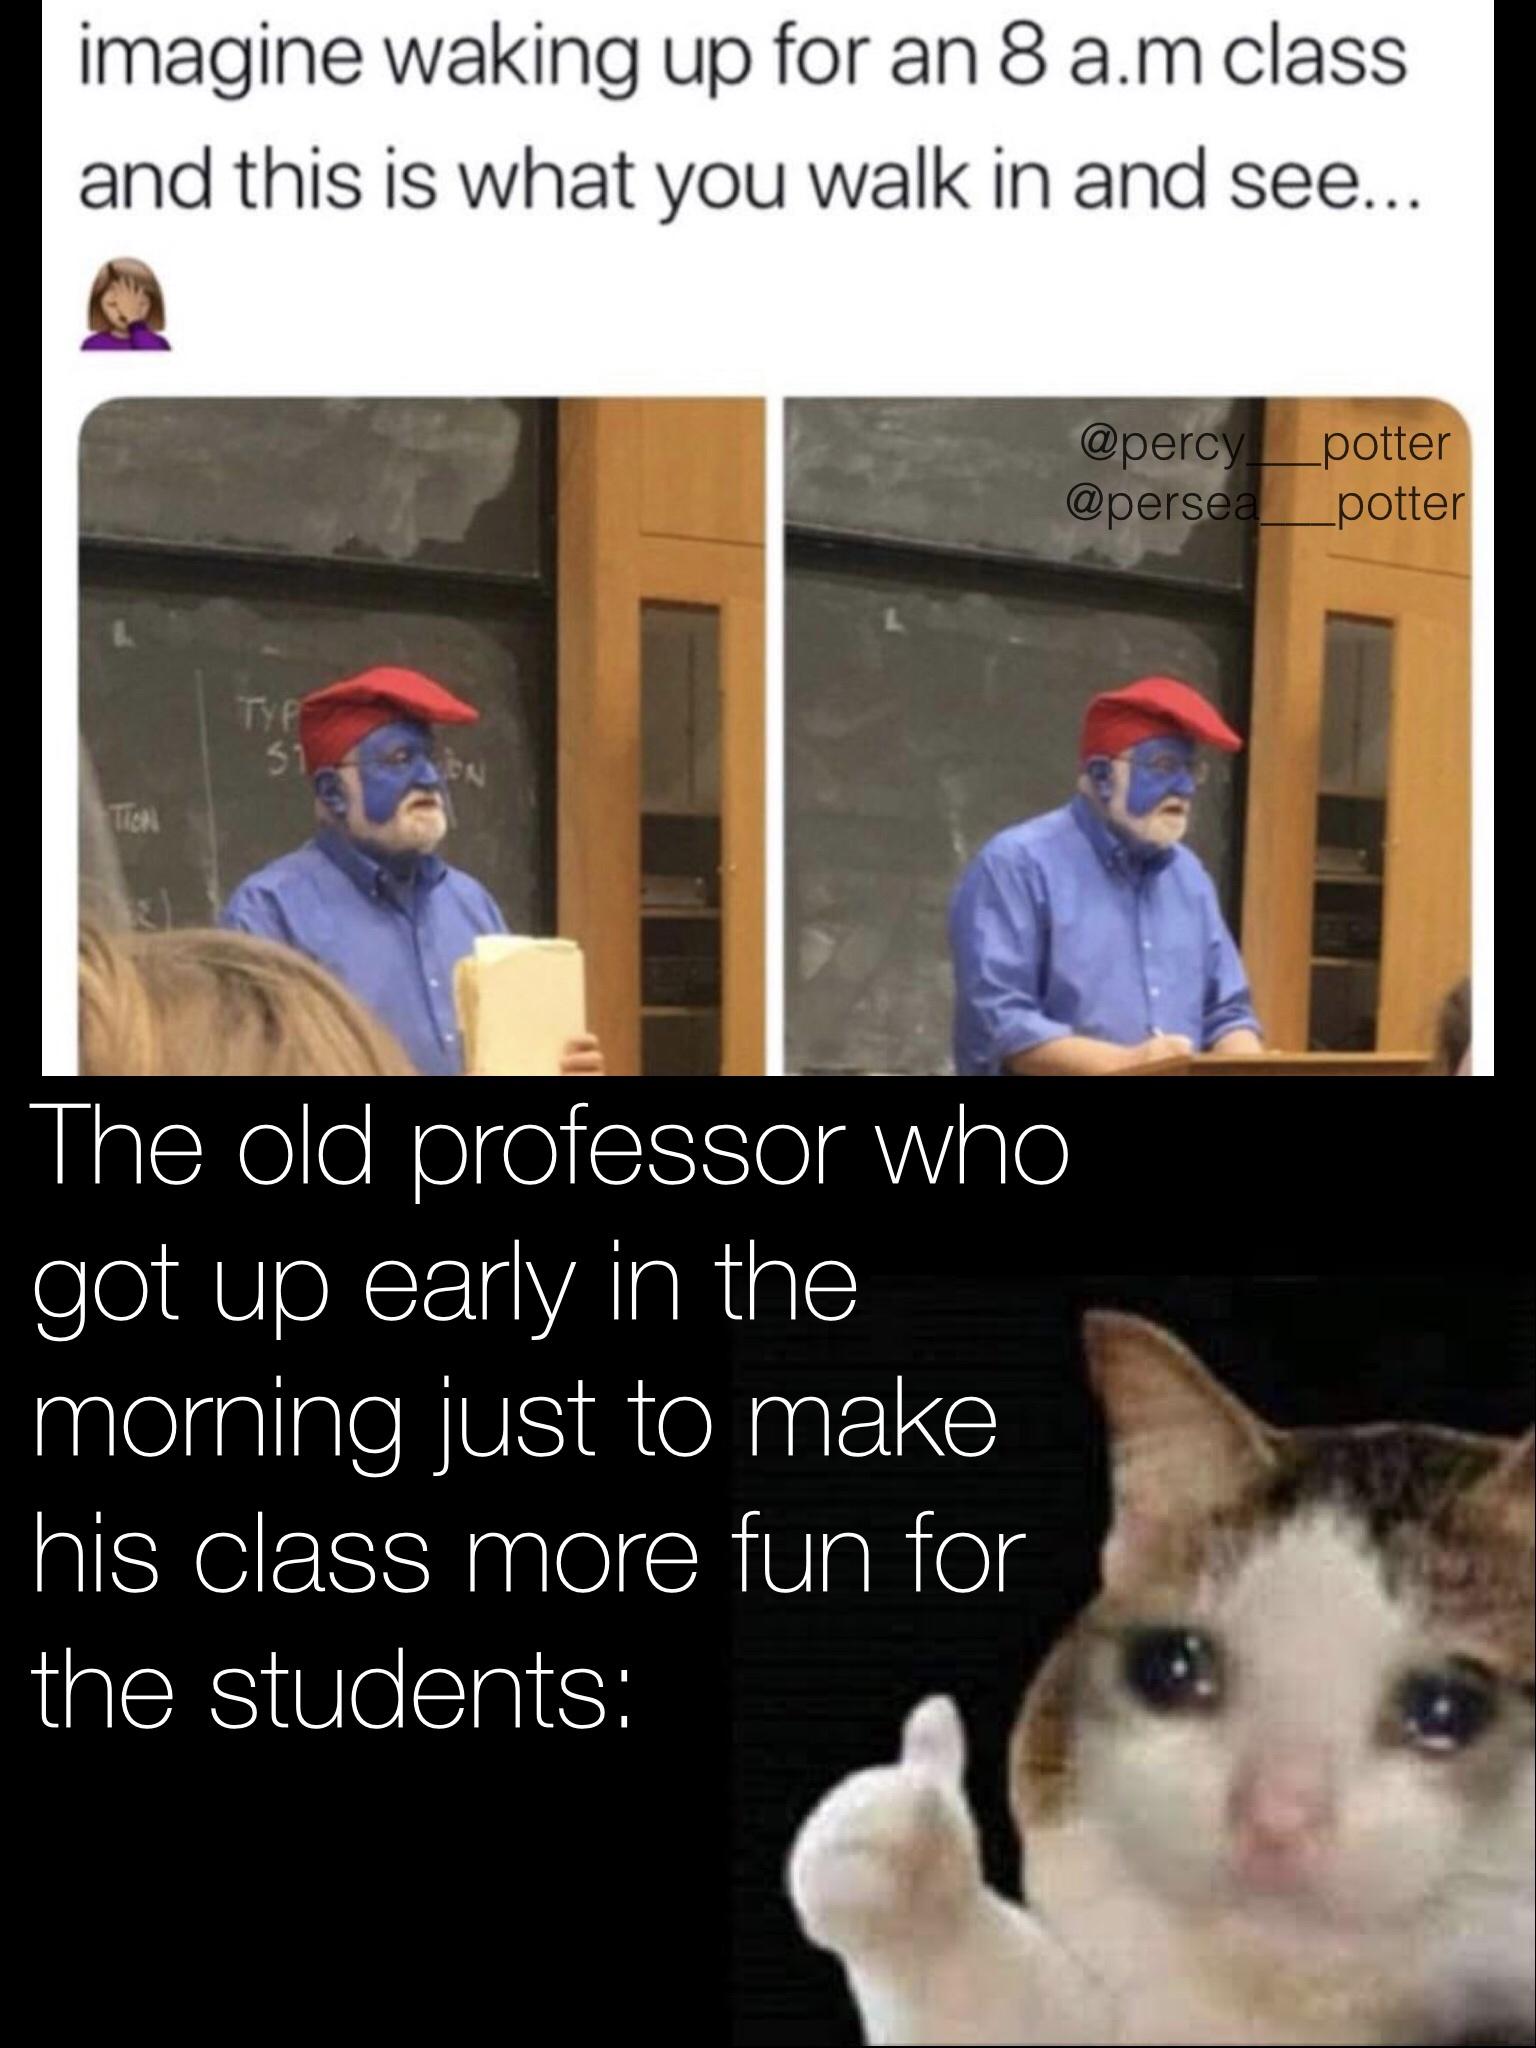 funny memes - smurf professor - imagine waking up for an 8 a.m class and this is what you walk in and see... Typ 31 30N Tich The old professor who got up early in the morning just to make his class more fun for the students